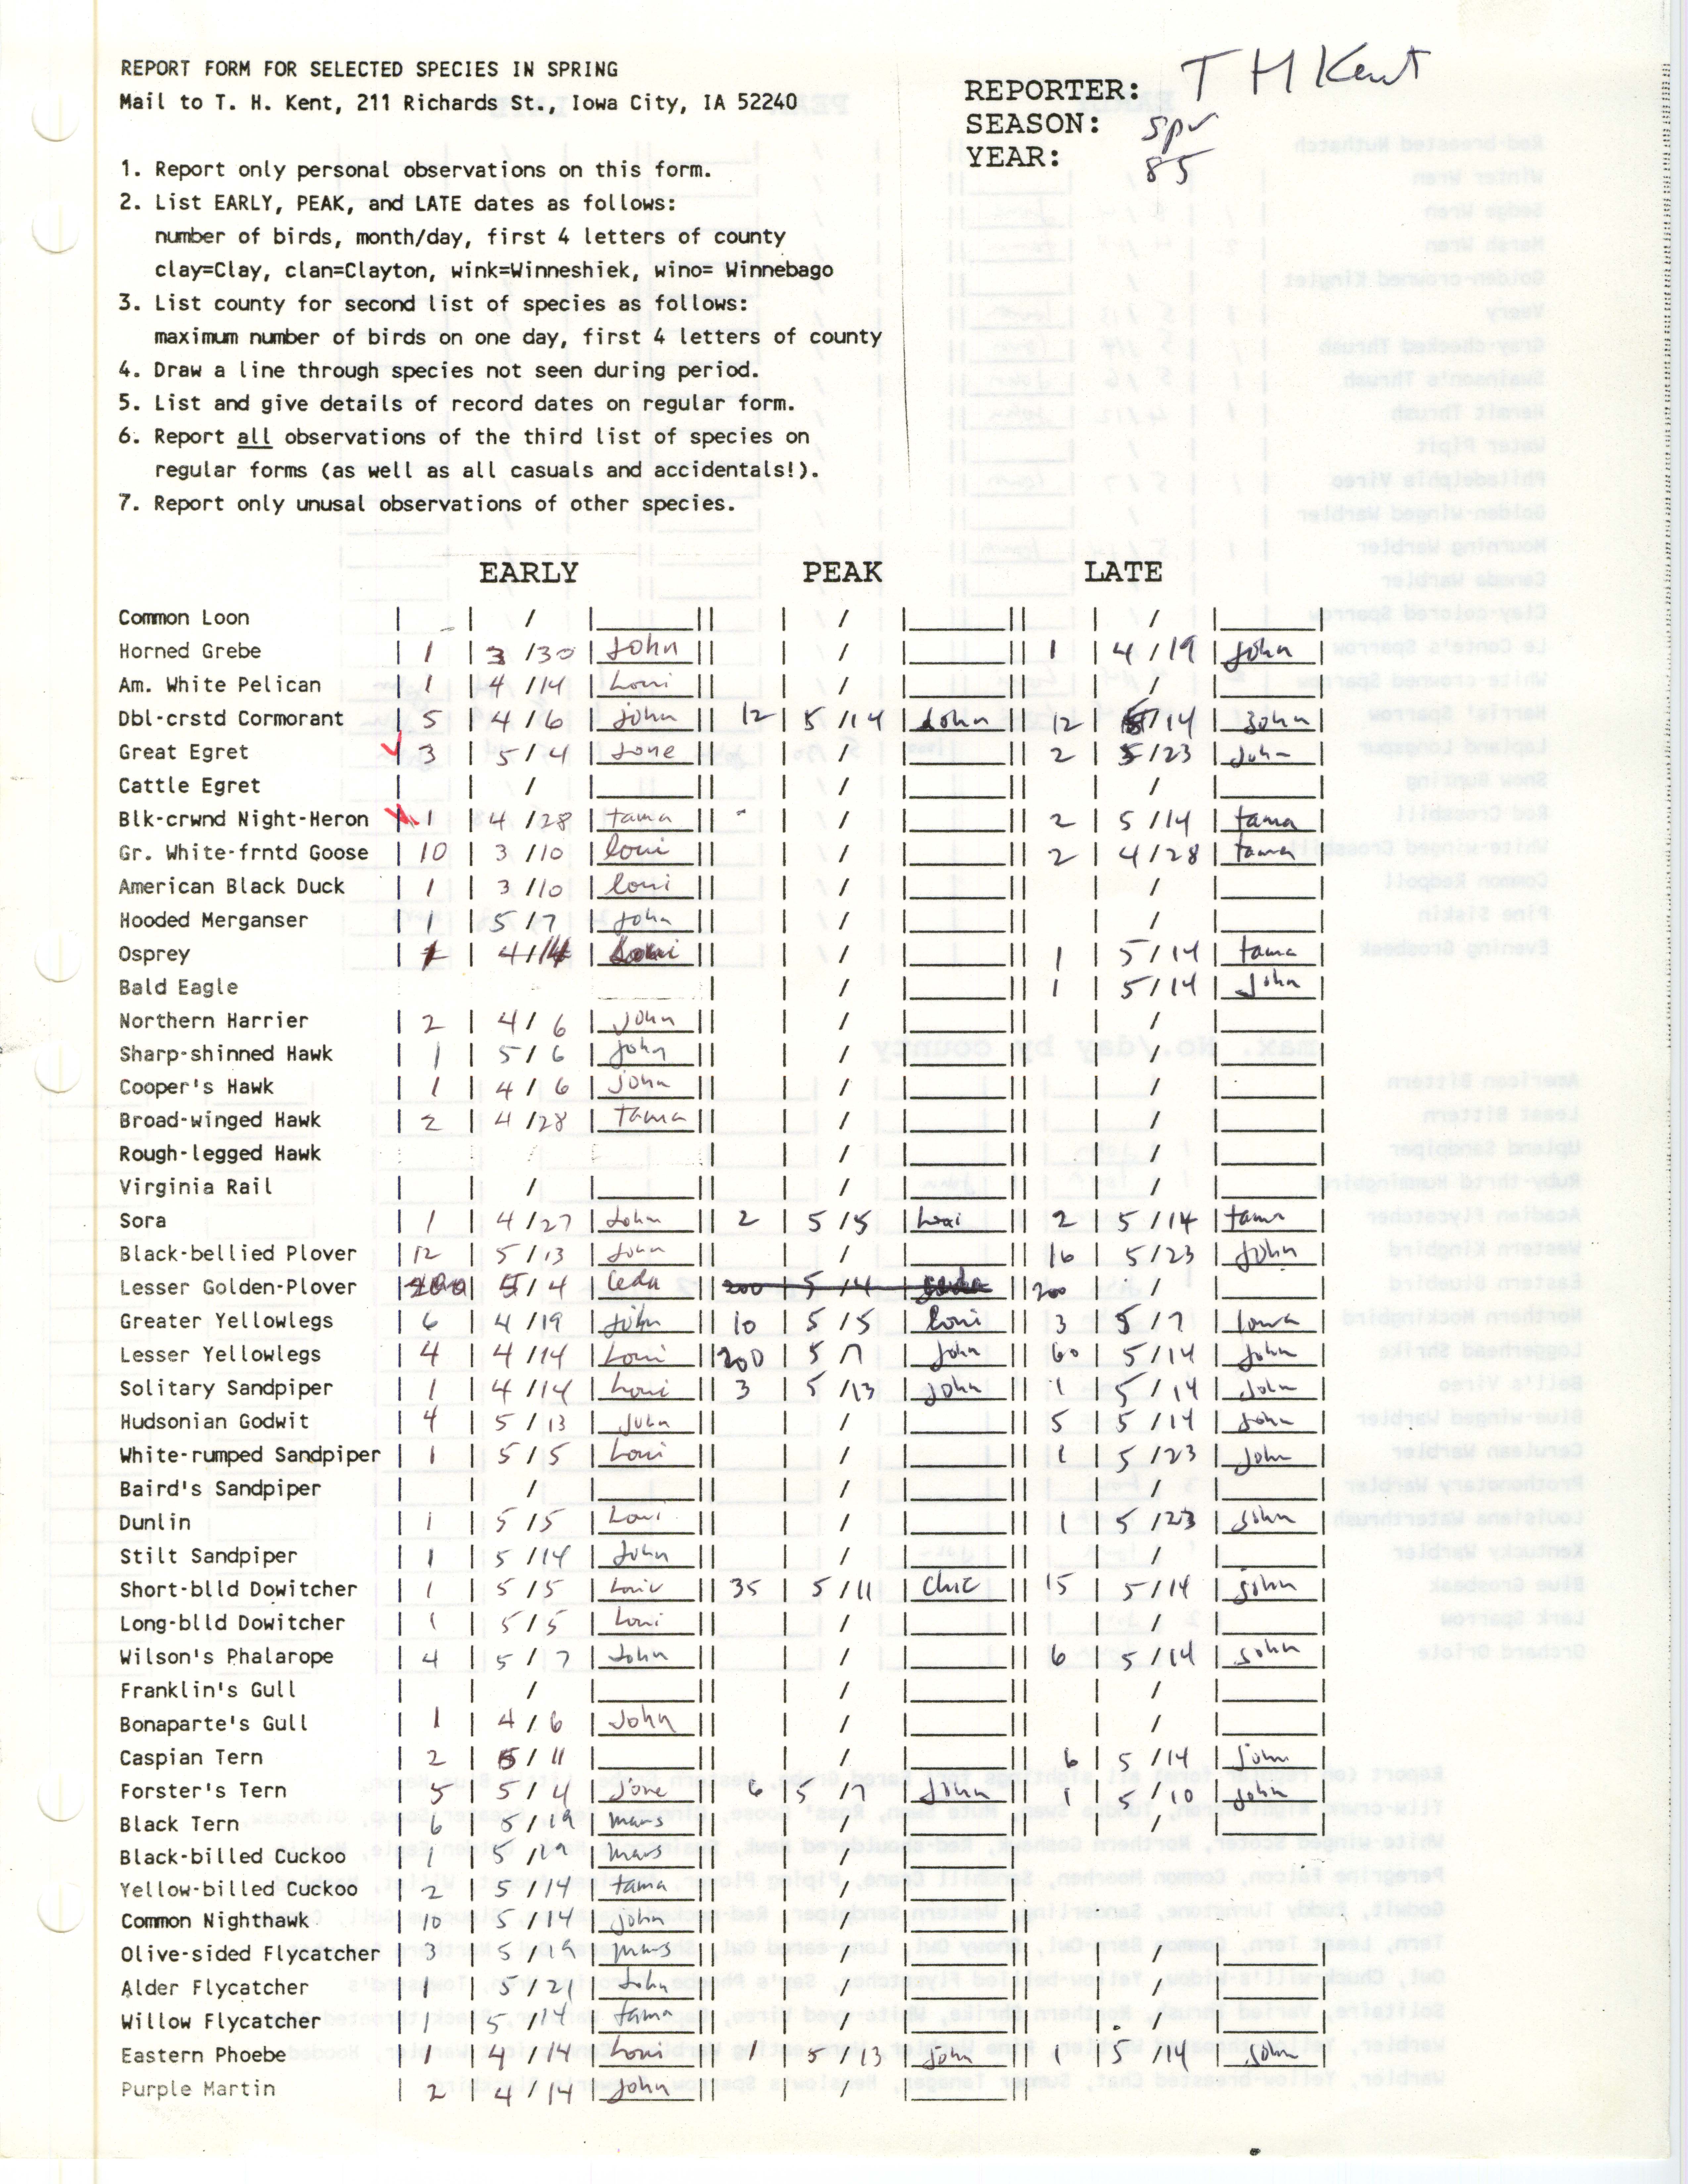 Report form for selected species in spring, contributed by Thomas H. Kent, spring 1985